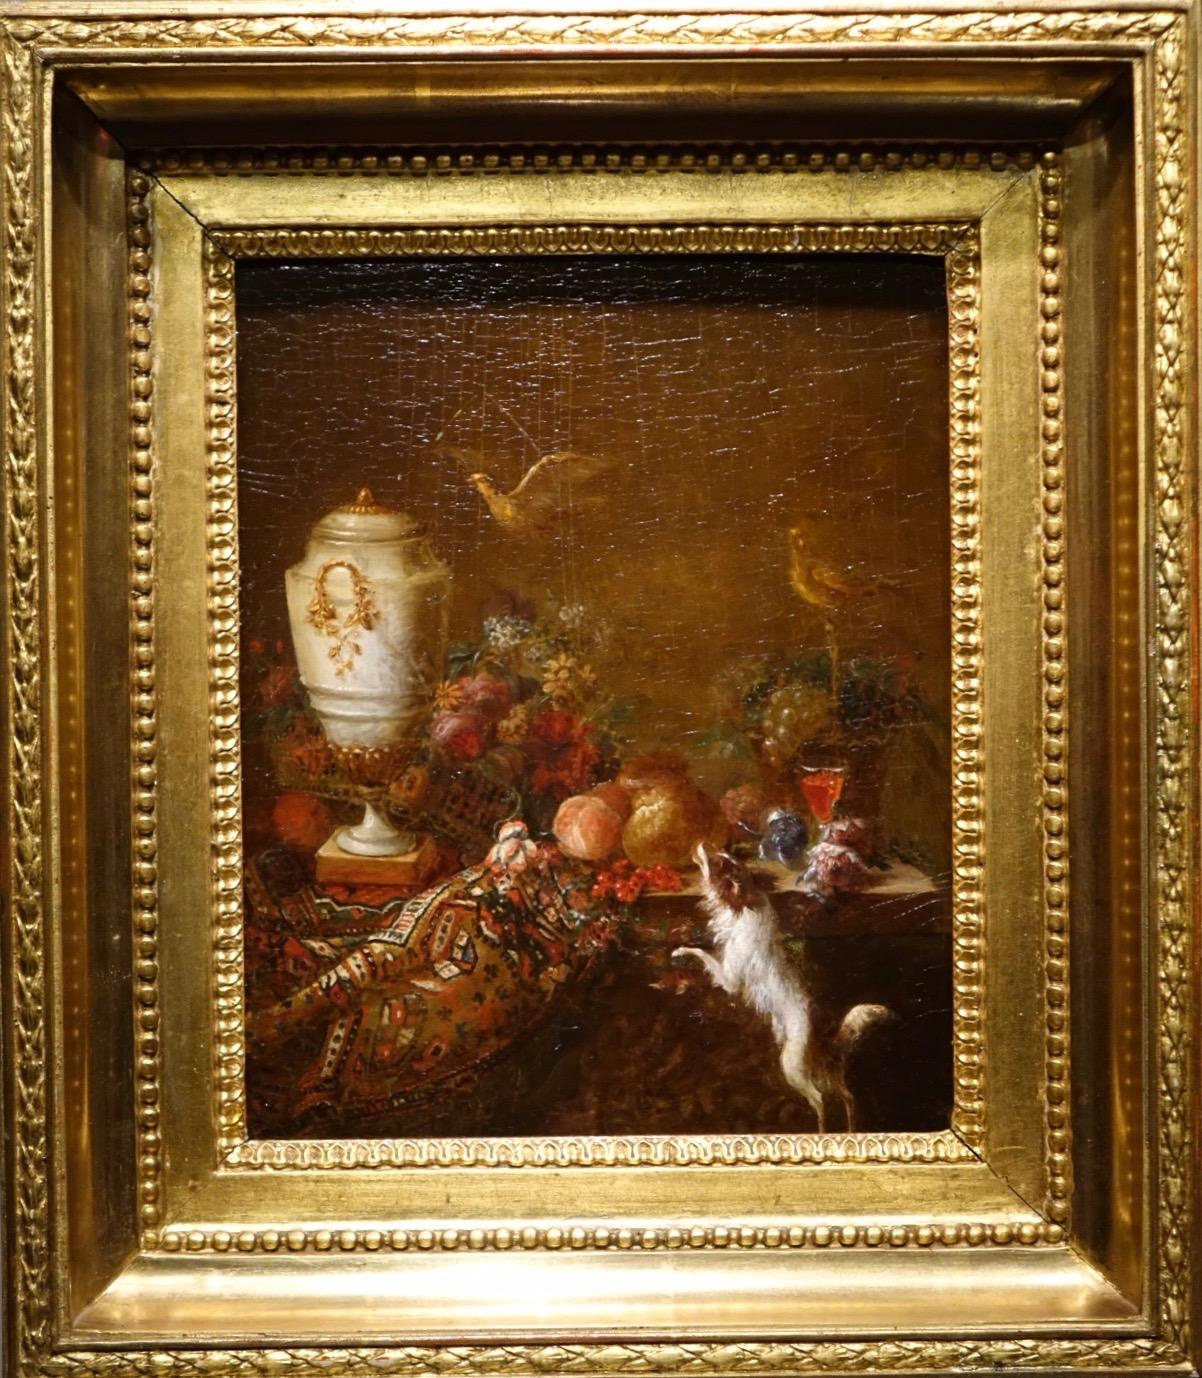 Pair of paintings, oil on oak panels, representing still life with birds, dog, flowers, fruits, vases and carpets on entablatures.
On the first painting, we see a parrot tasting a fruit, a dog on the left, on the edge of a window, watching him.
On